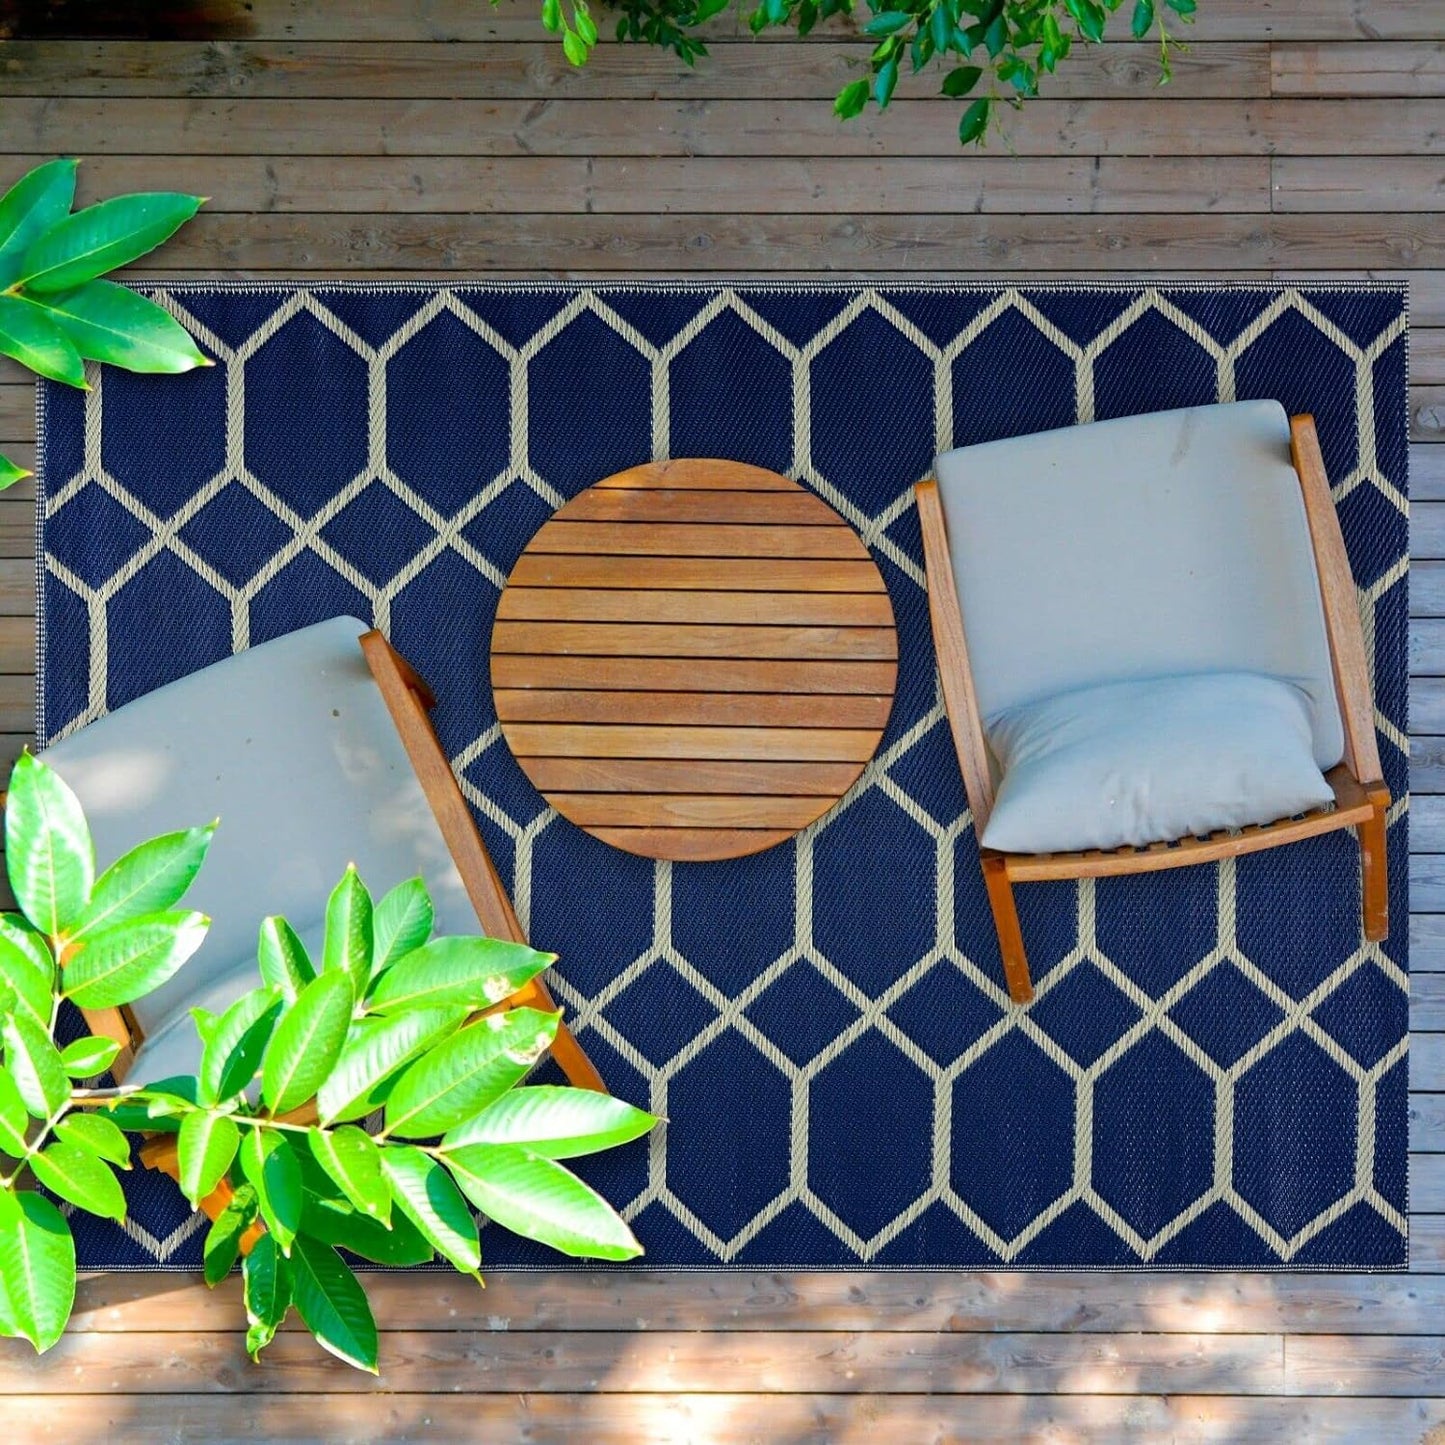 Playa Outdoor Rug - Crease-Free Recycled Plastic Floor Mat for Patio, Camping, Beach, Balcony, Porch, Deck - Weather, Water, Stain, Lightweight, Fade and UV Resistant - Miami- Navy & Creme